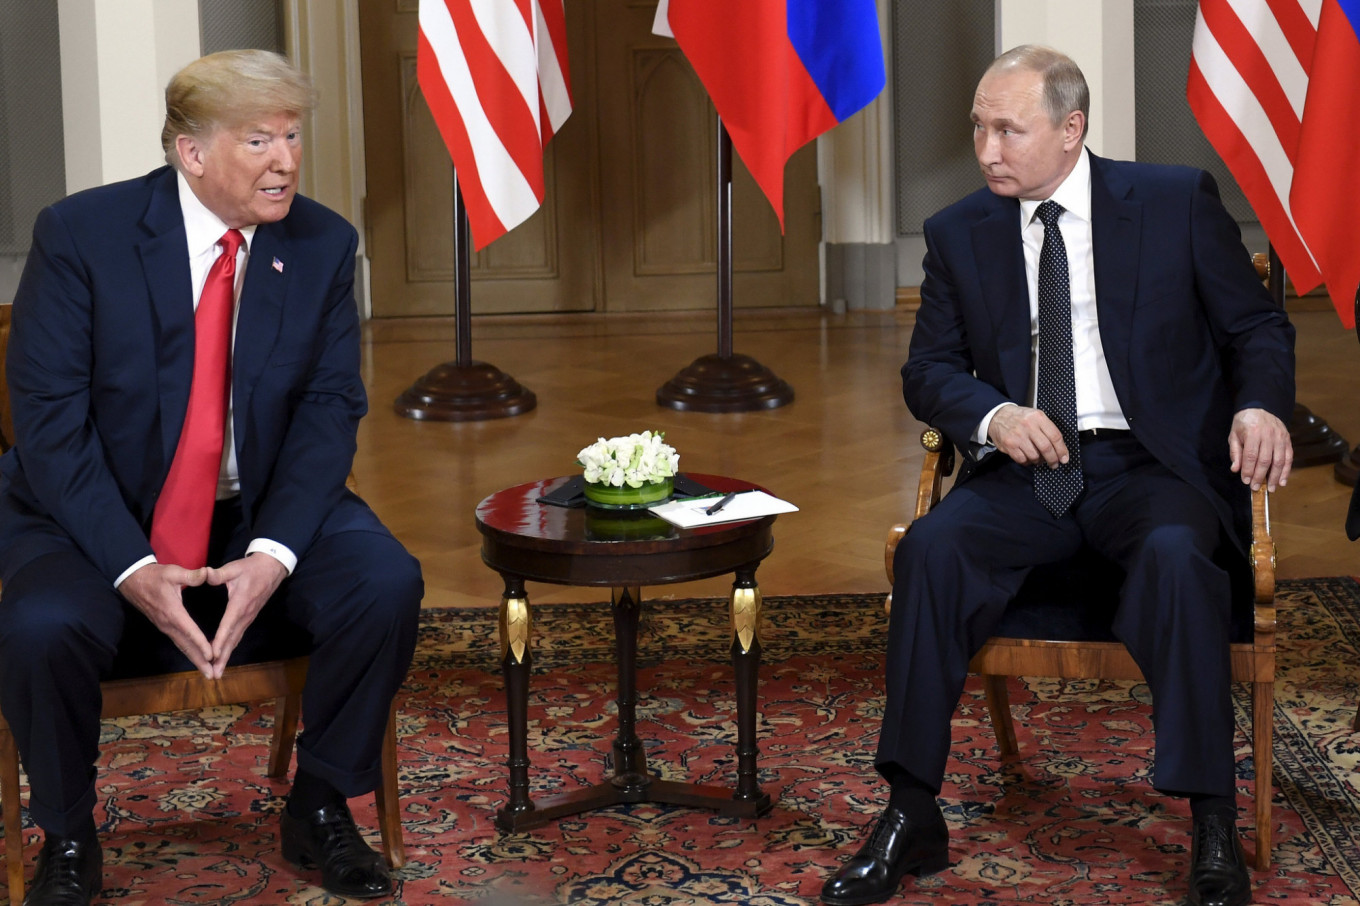 Trump, Putin Discuss Possible New Nuclear Accord – White House